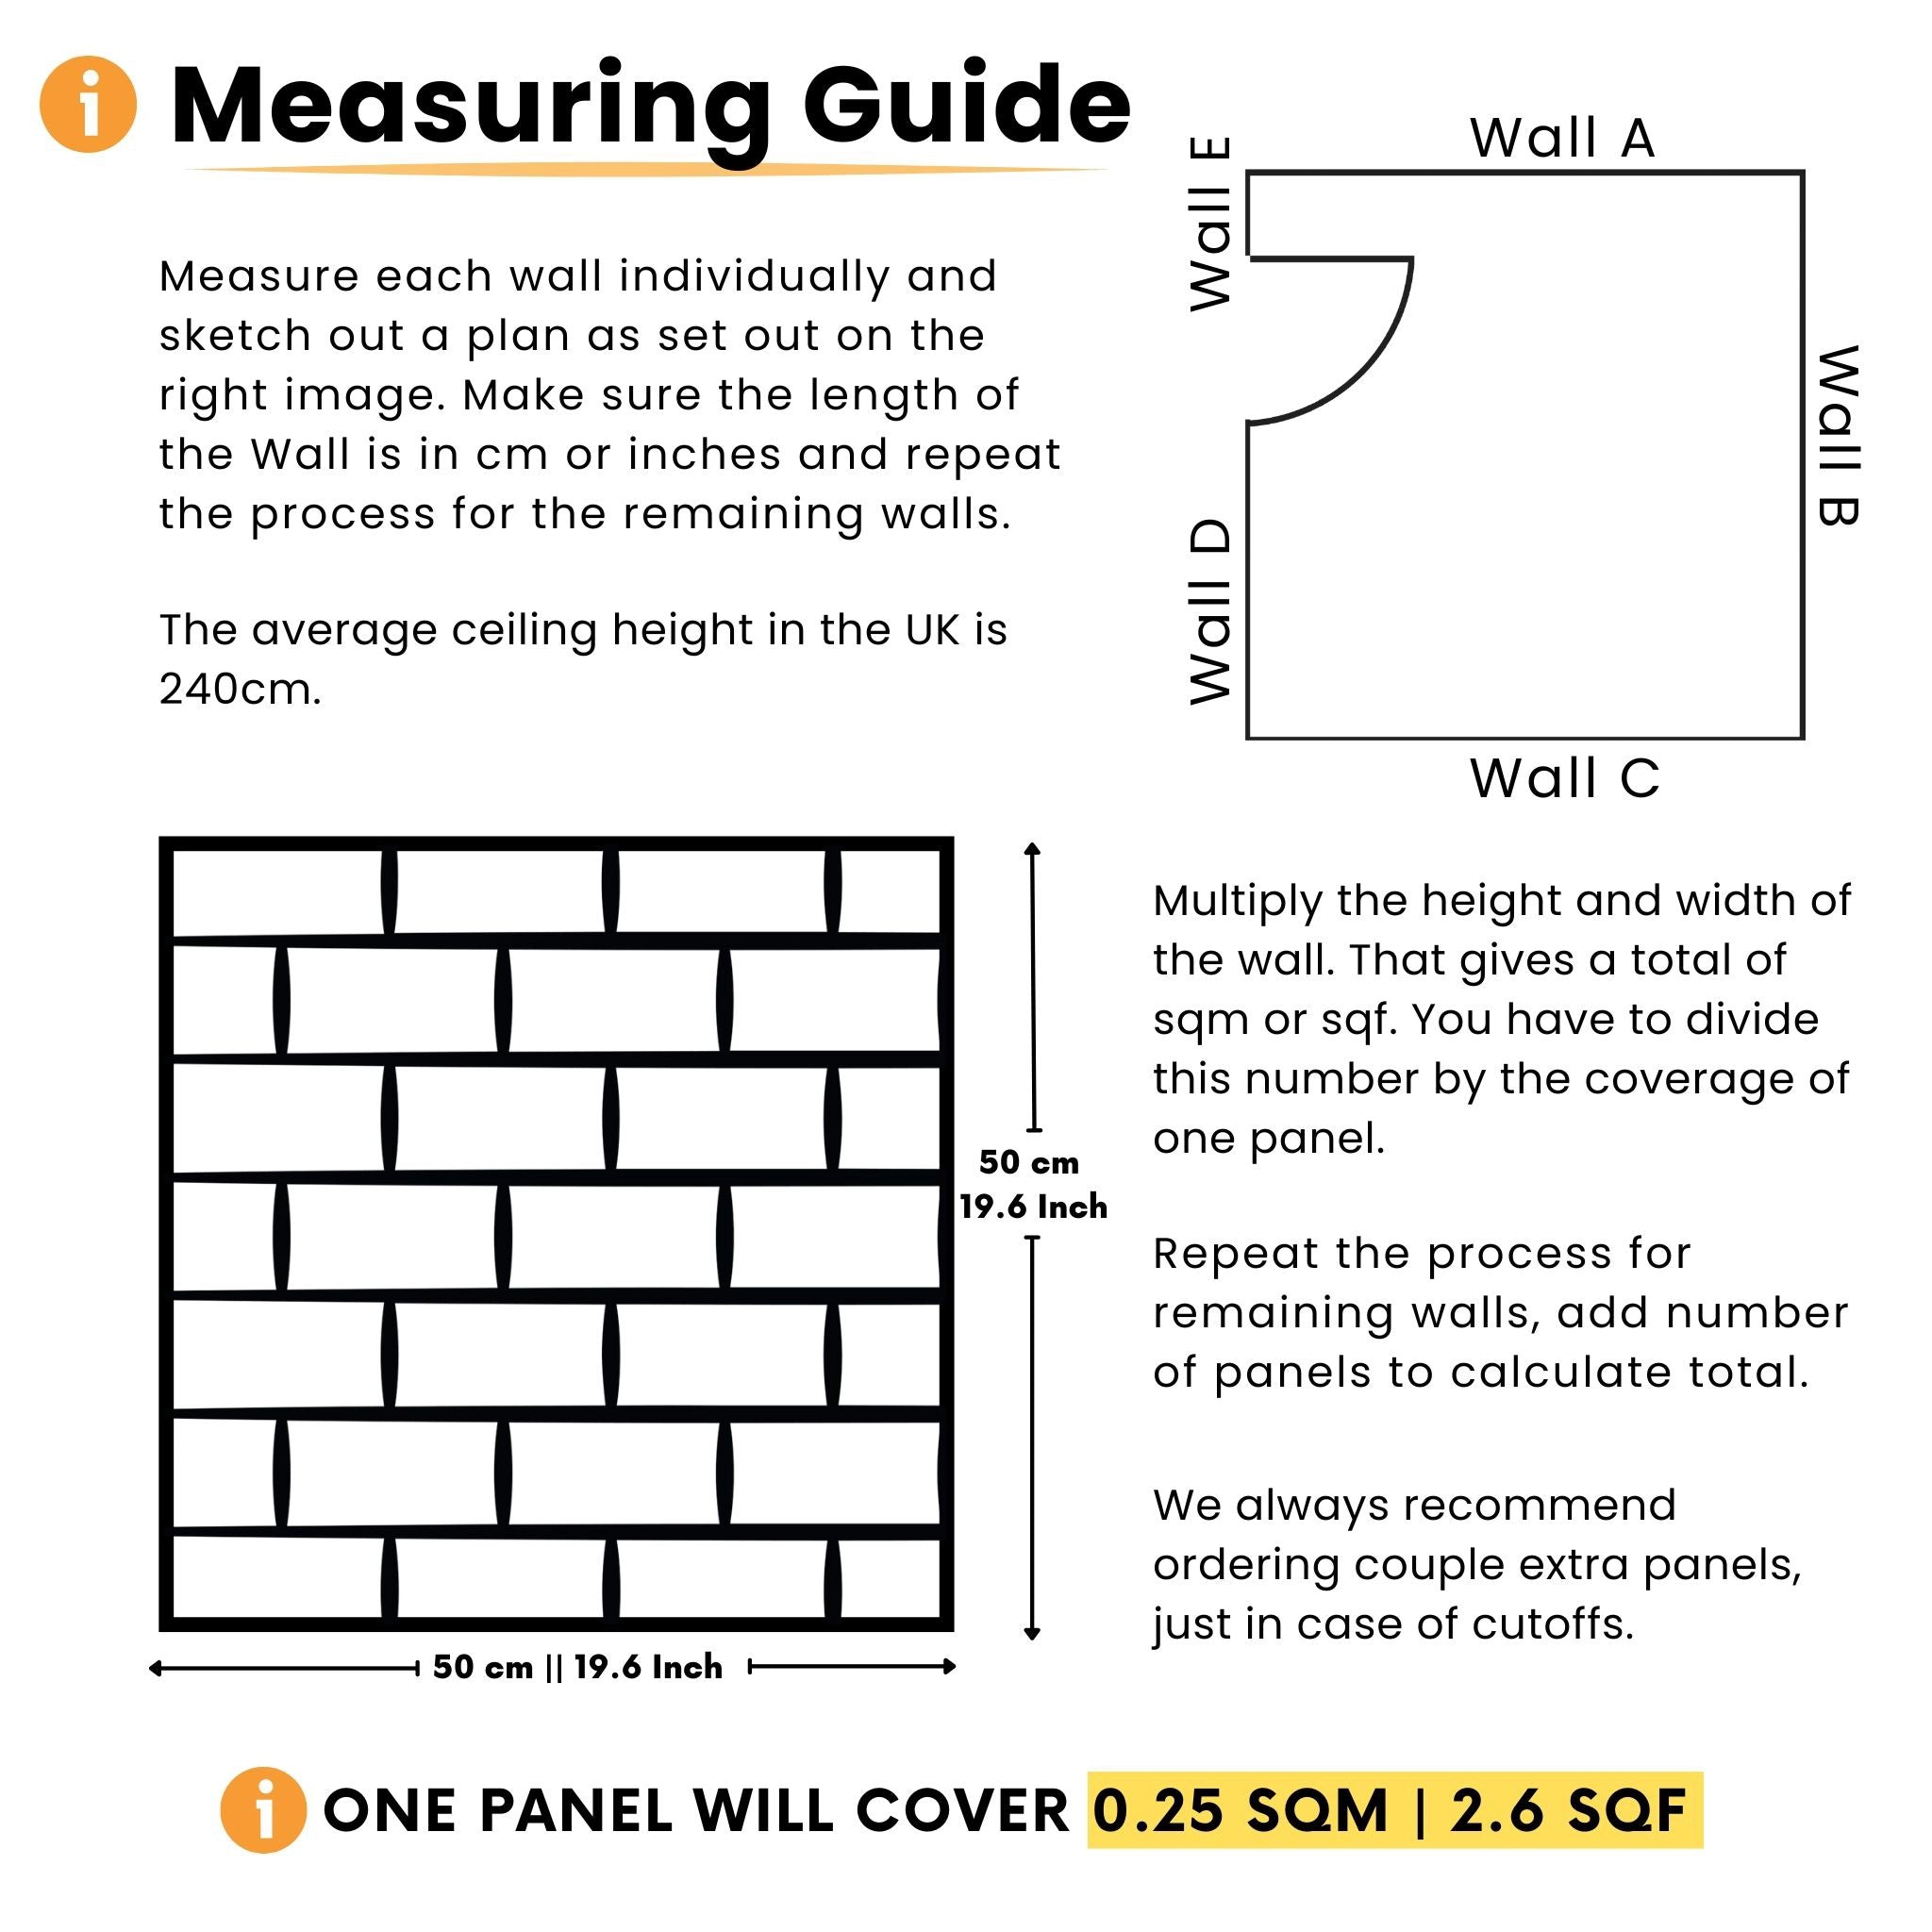 Measuring guide for PVC wall panels, dimensions and coverage area